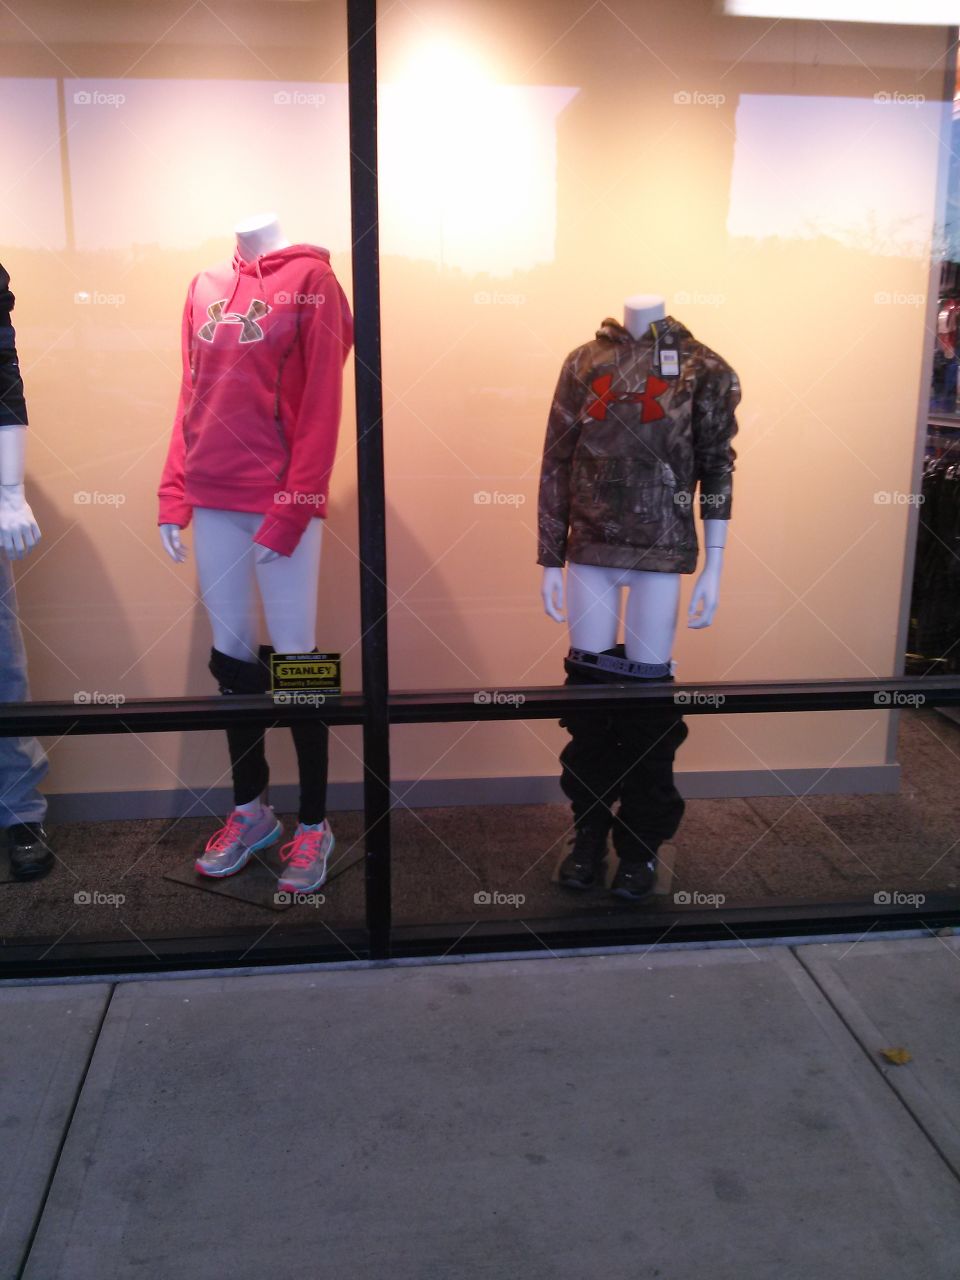 Random. In a Hibbit Spot Shop window someone pulled the models pants down